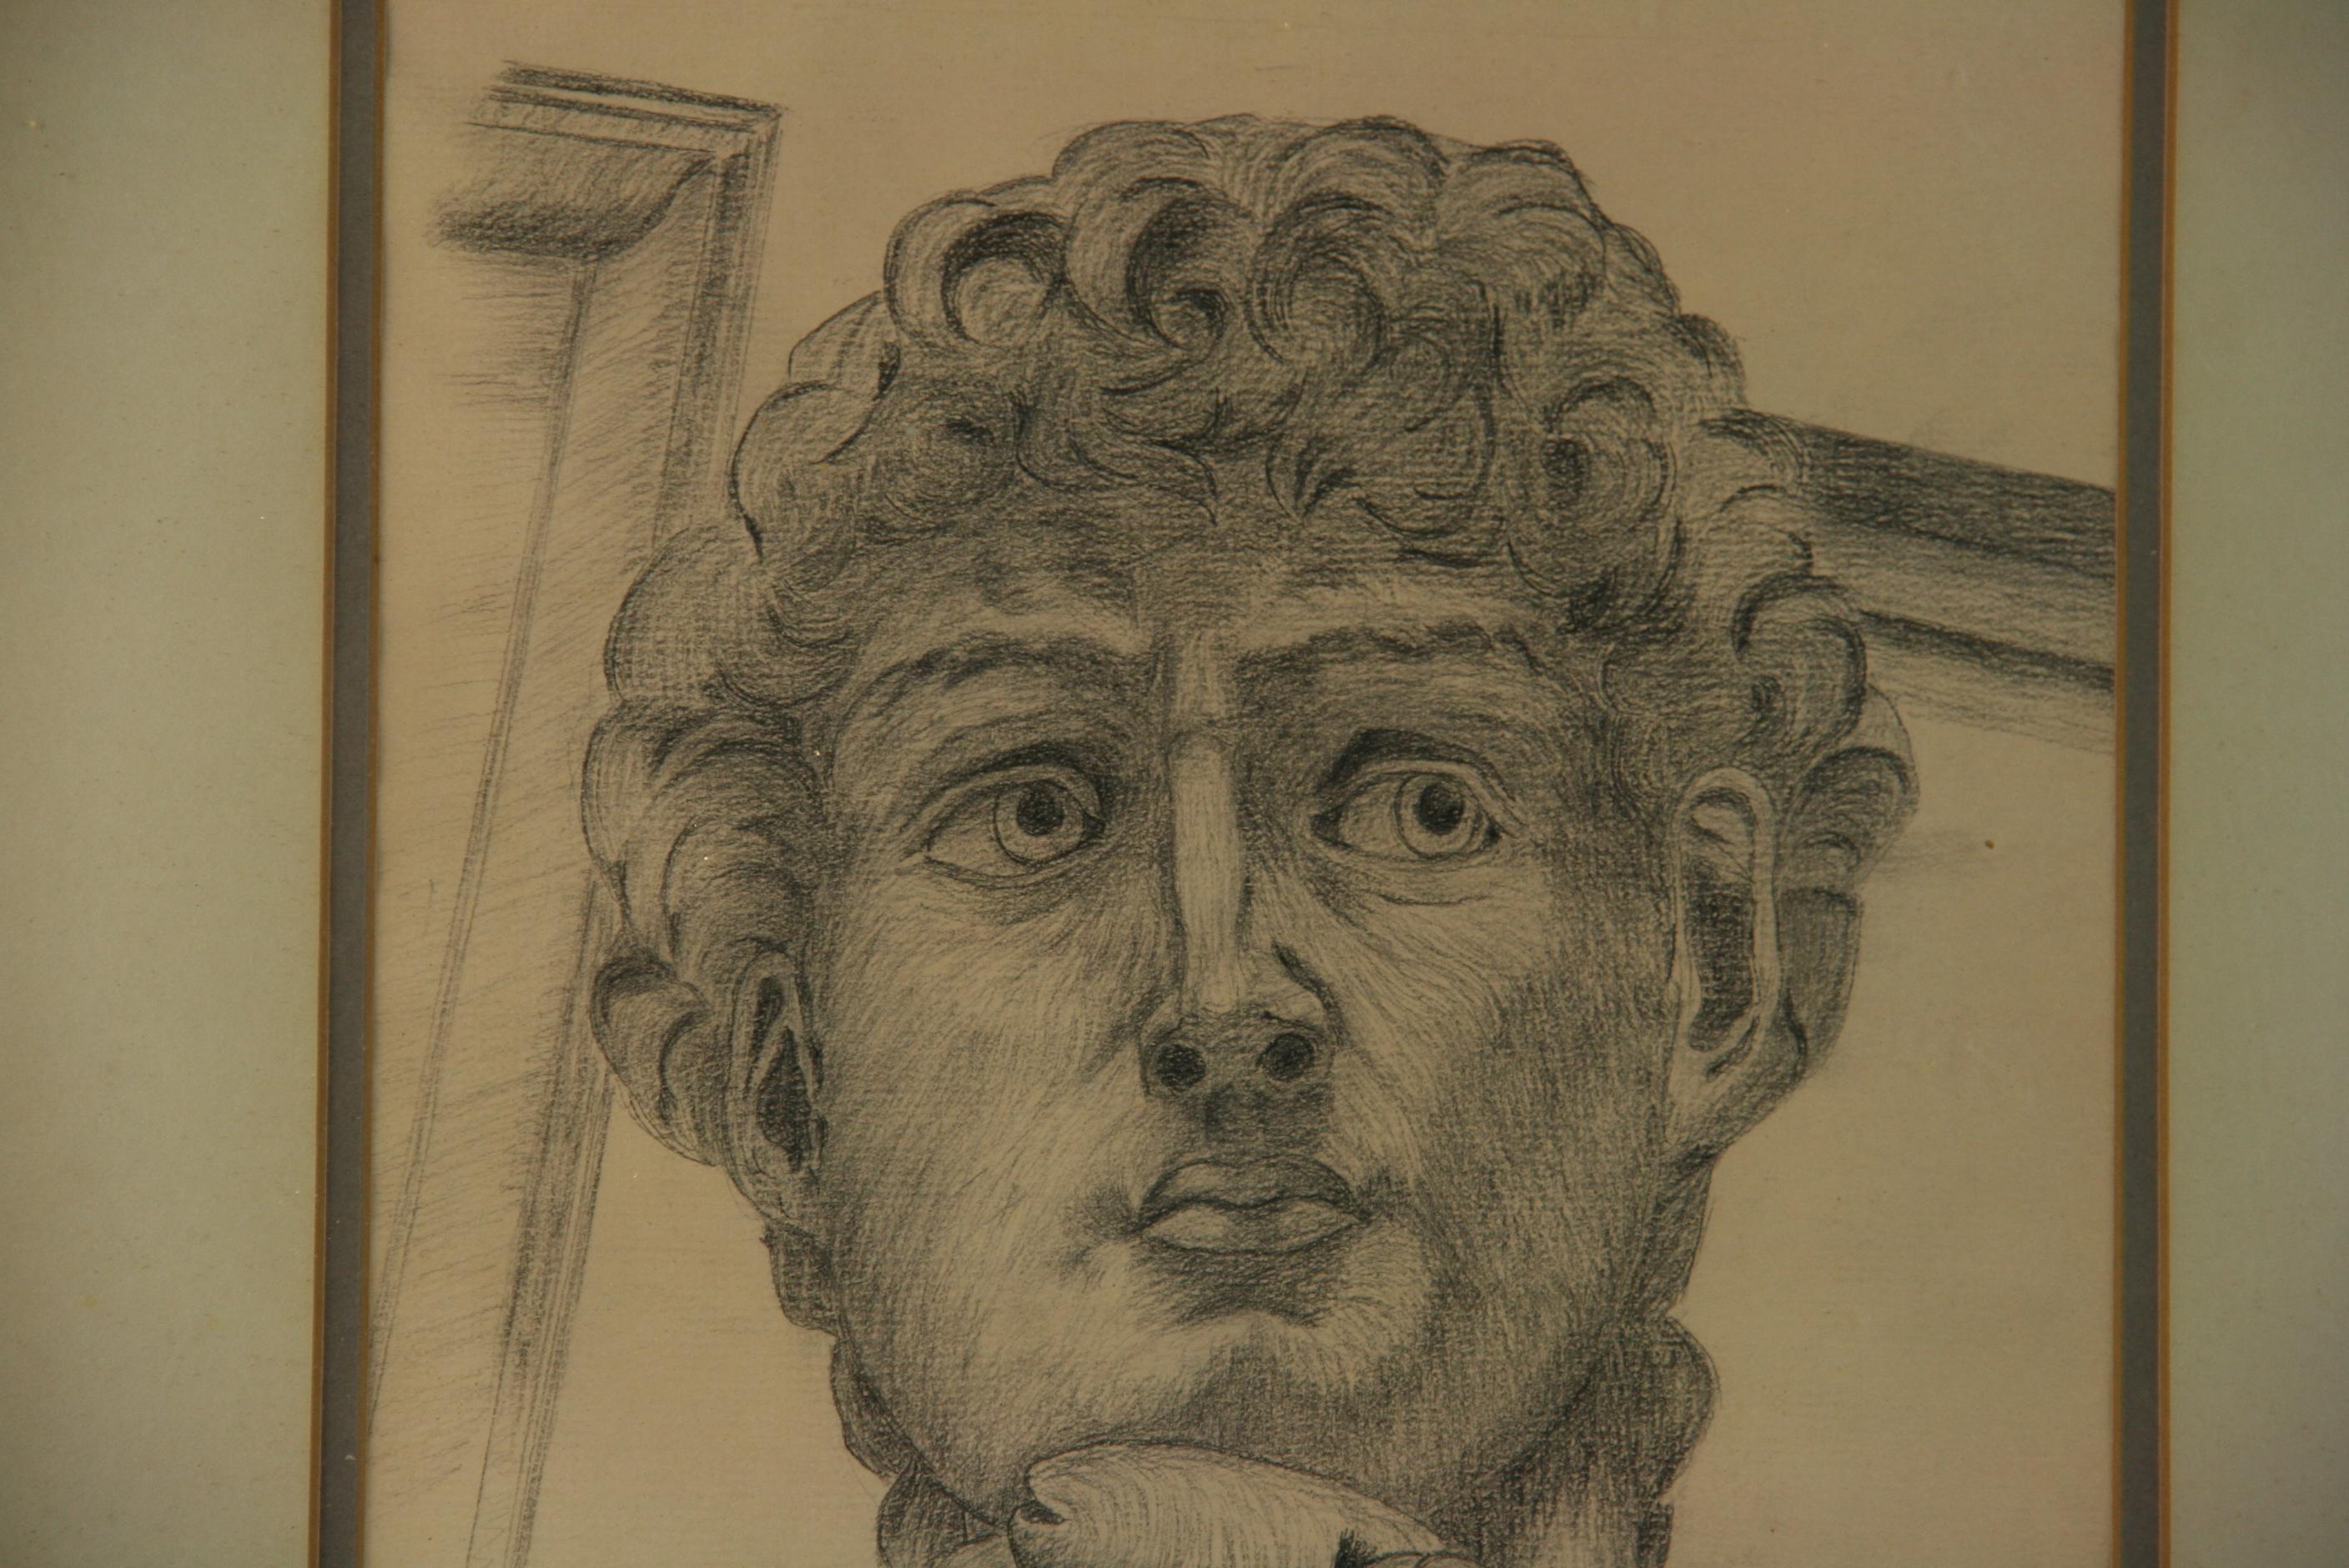 Vintage Classical Italian Charcoal Drawing of Michelangelo's David - Brown Figurative Art by E.Tobia